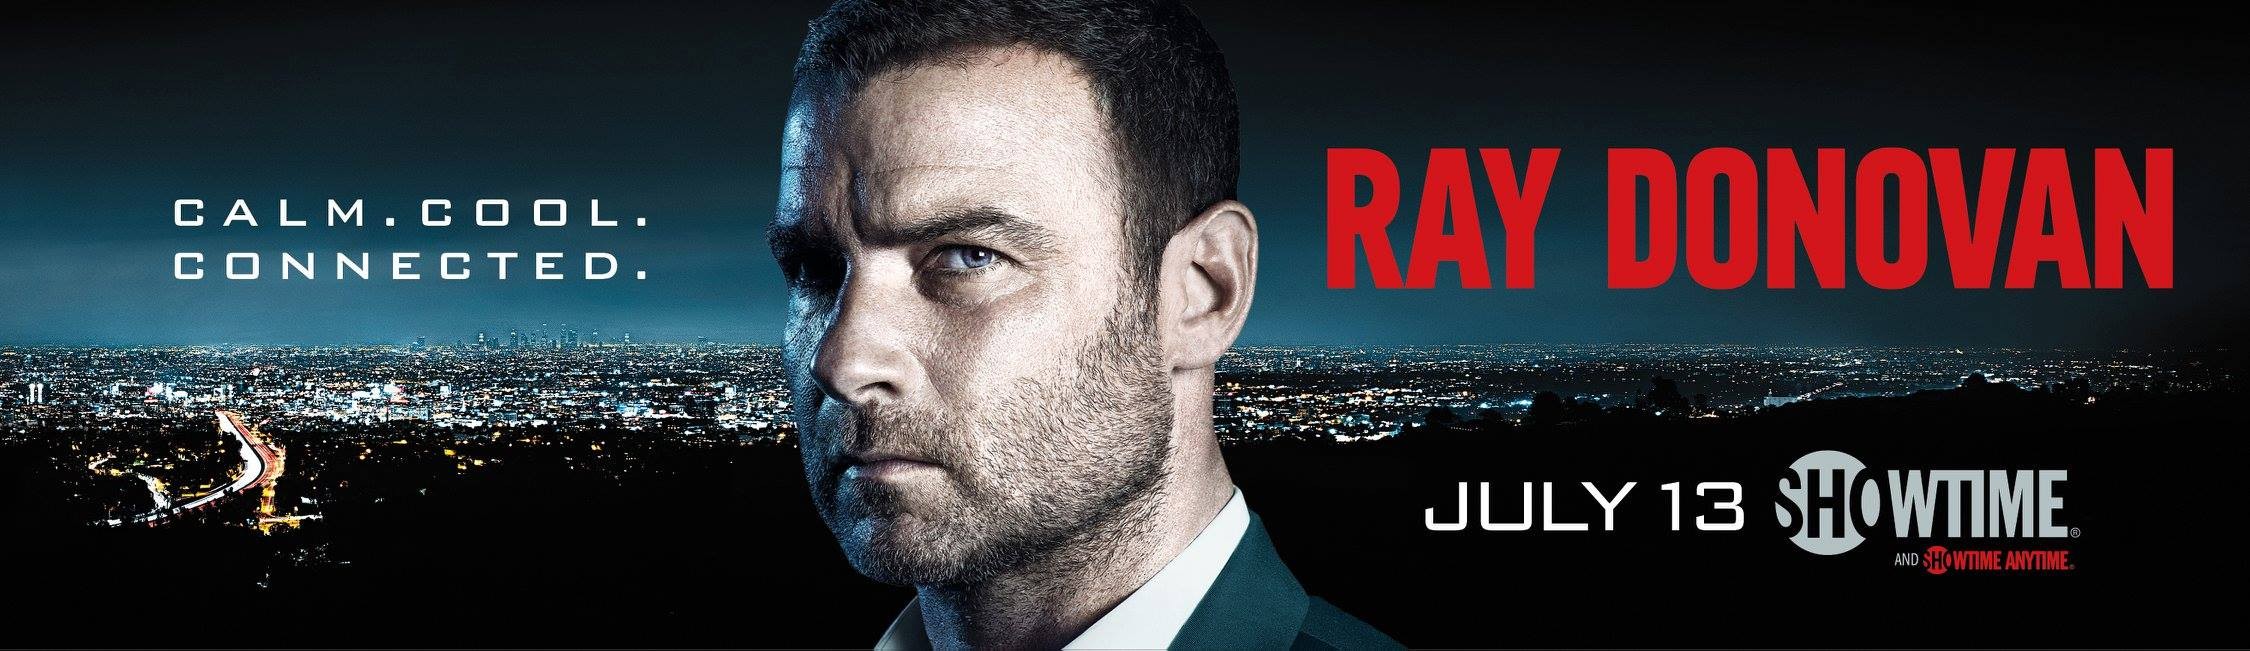 Mega Sized TV Poster Image for Ray Donovan (#5 of 12)